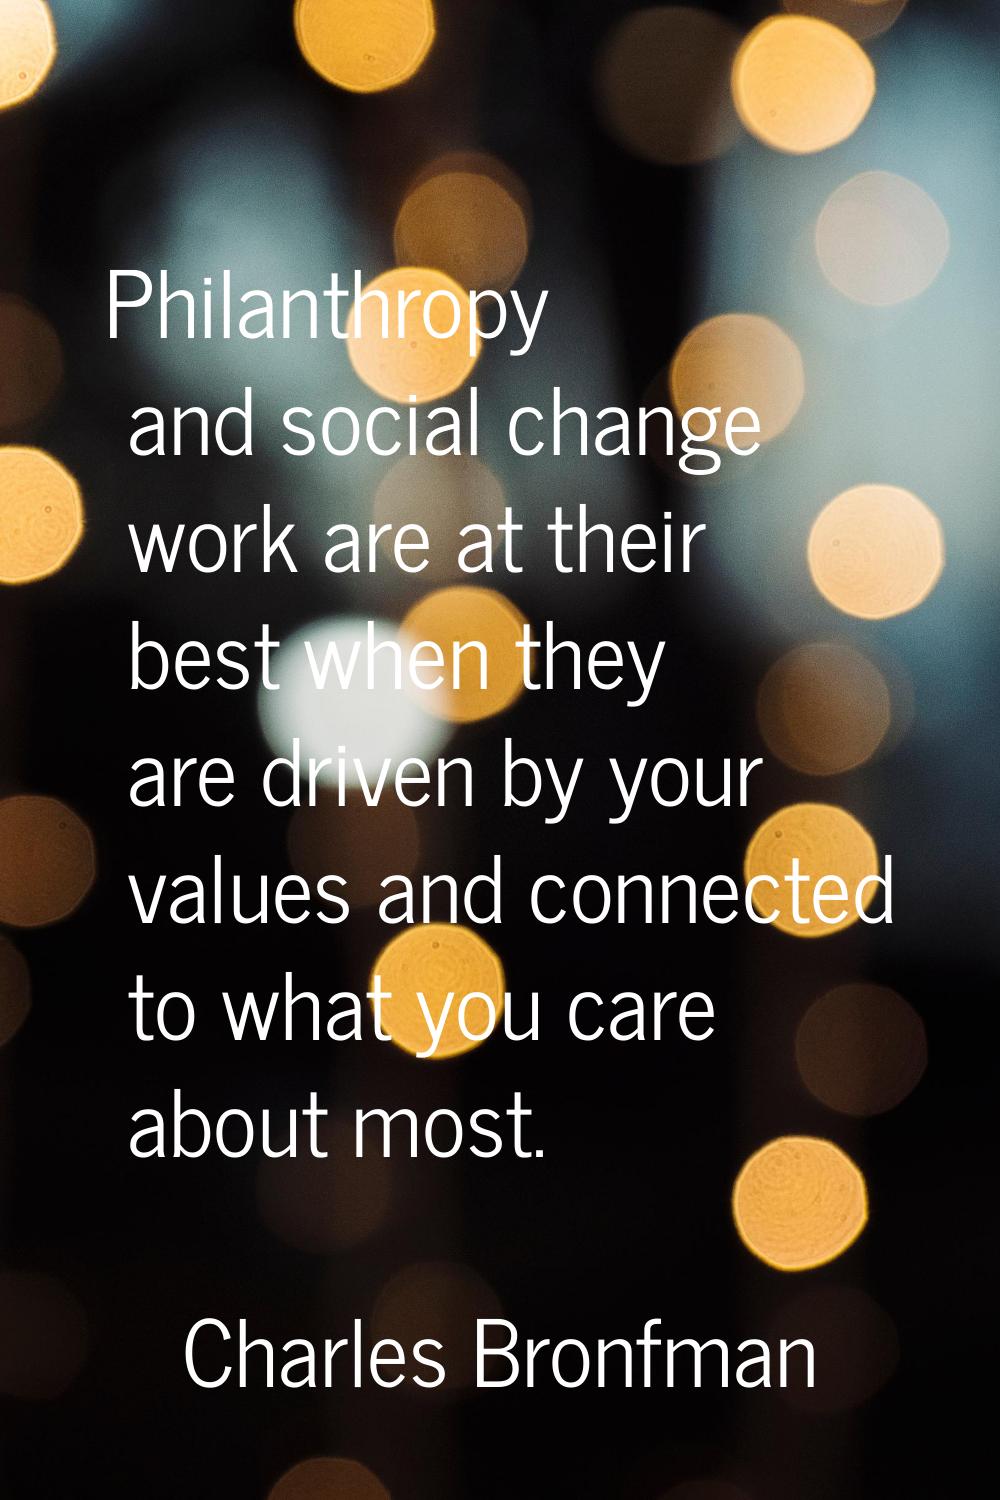 Philanthropy and social change work are at their best when they are driven by your values and conne